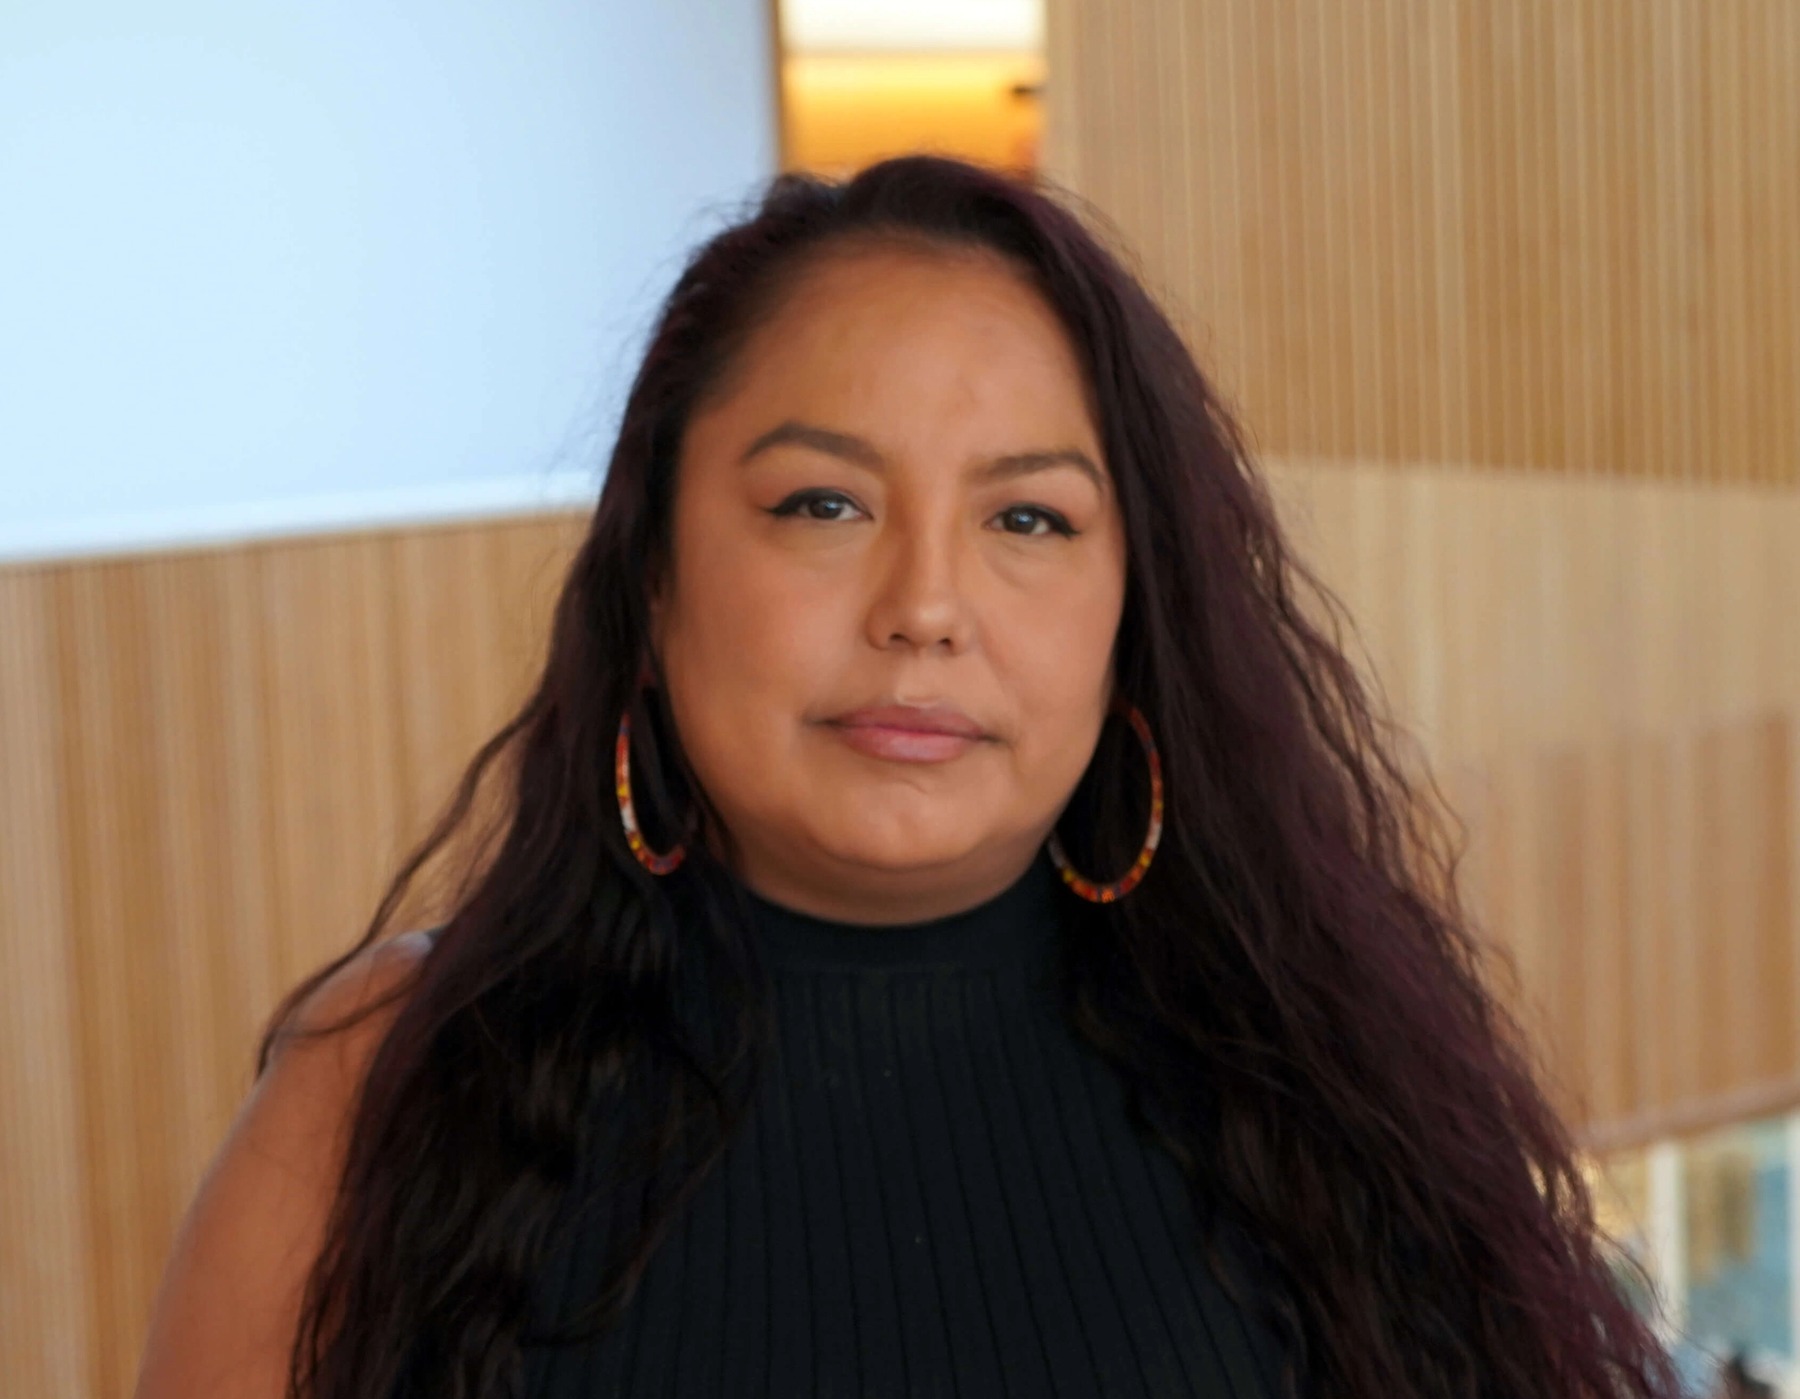 Head and shoulders portrait of an Indigenous woman with long dark hair, a black top and hoop earrings.